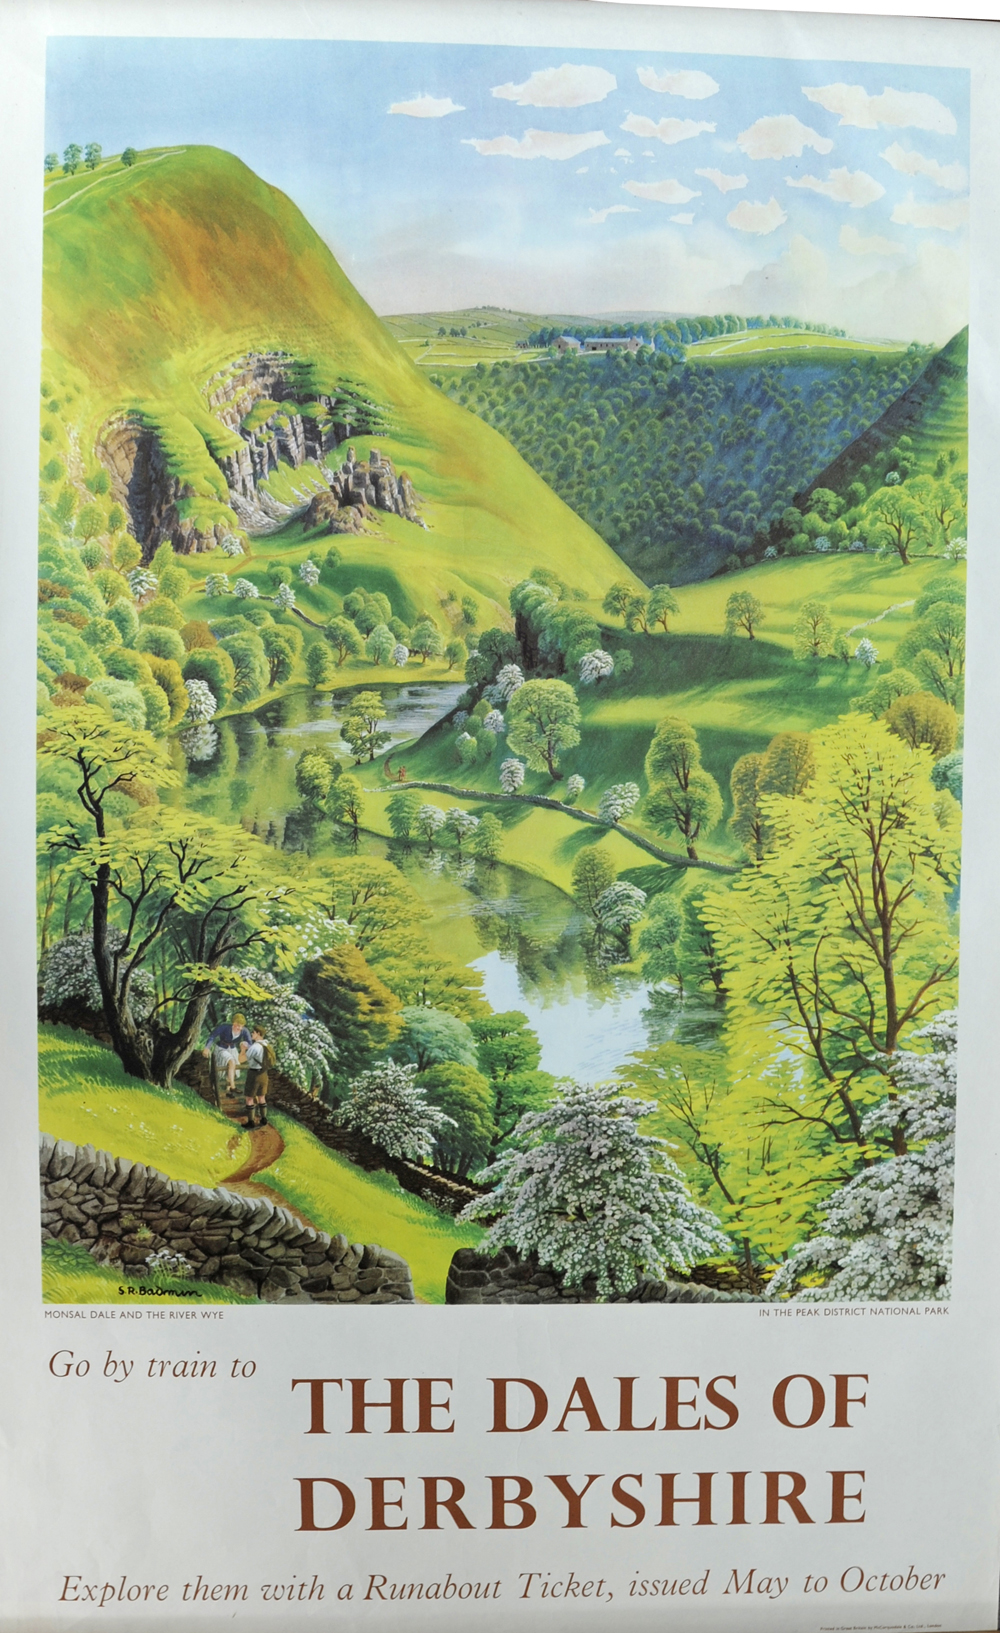 BR Poster "The Dales of Derbyshire" by S R Badmin, double royal size 40" x 25". Panoramic view of